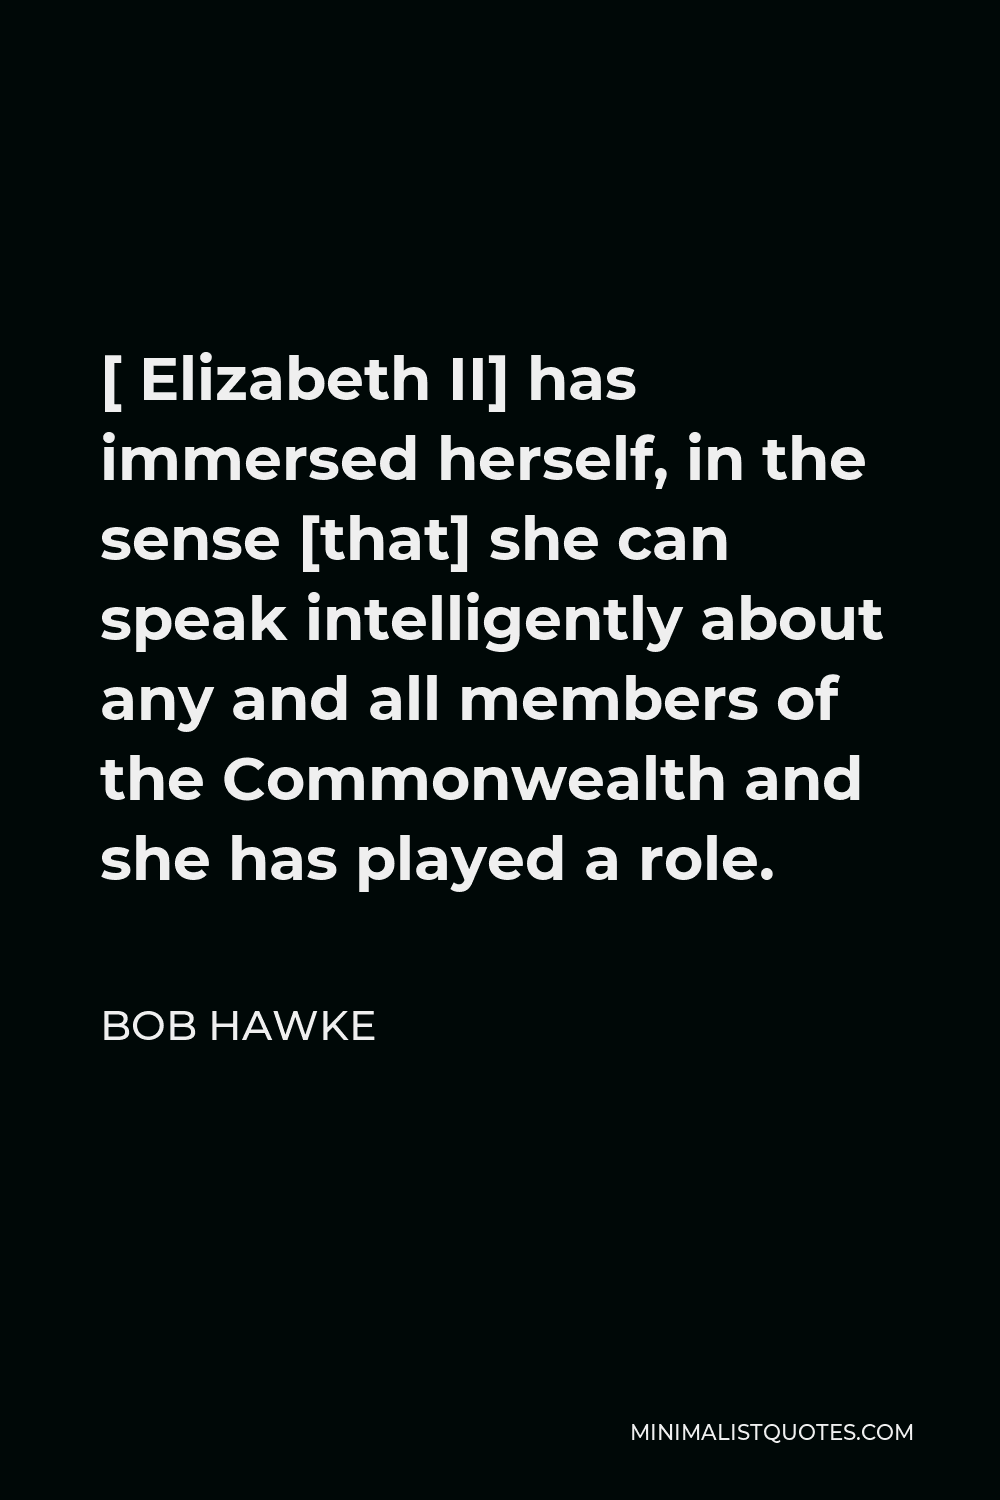 Bob Hawke Quote - [ Elizabeth II] has immersed herself, in the sense [that] she can speak intelligently about any and all members of the Commonwealth and she has played a role.